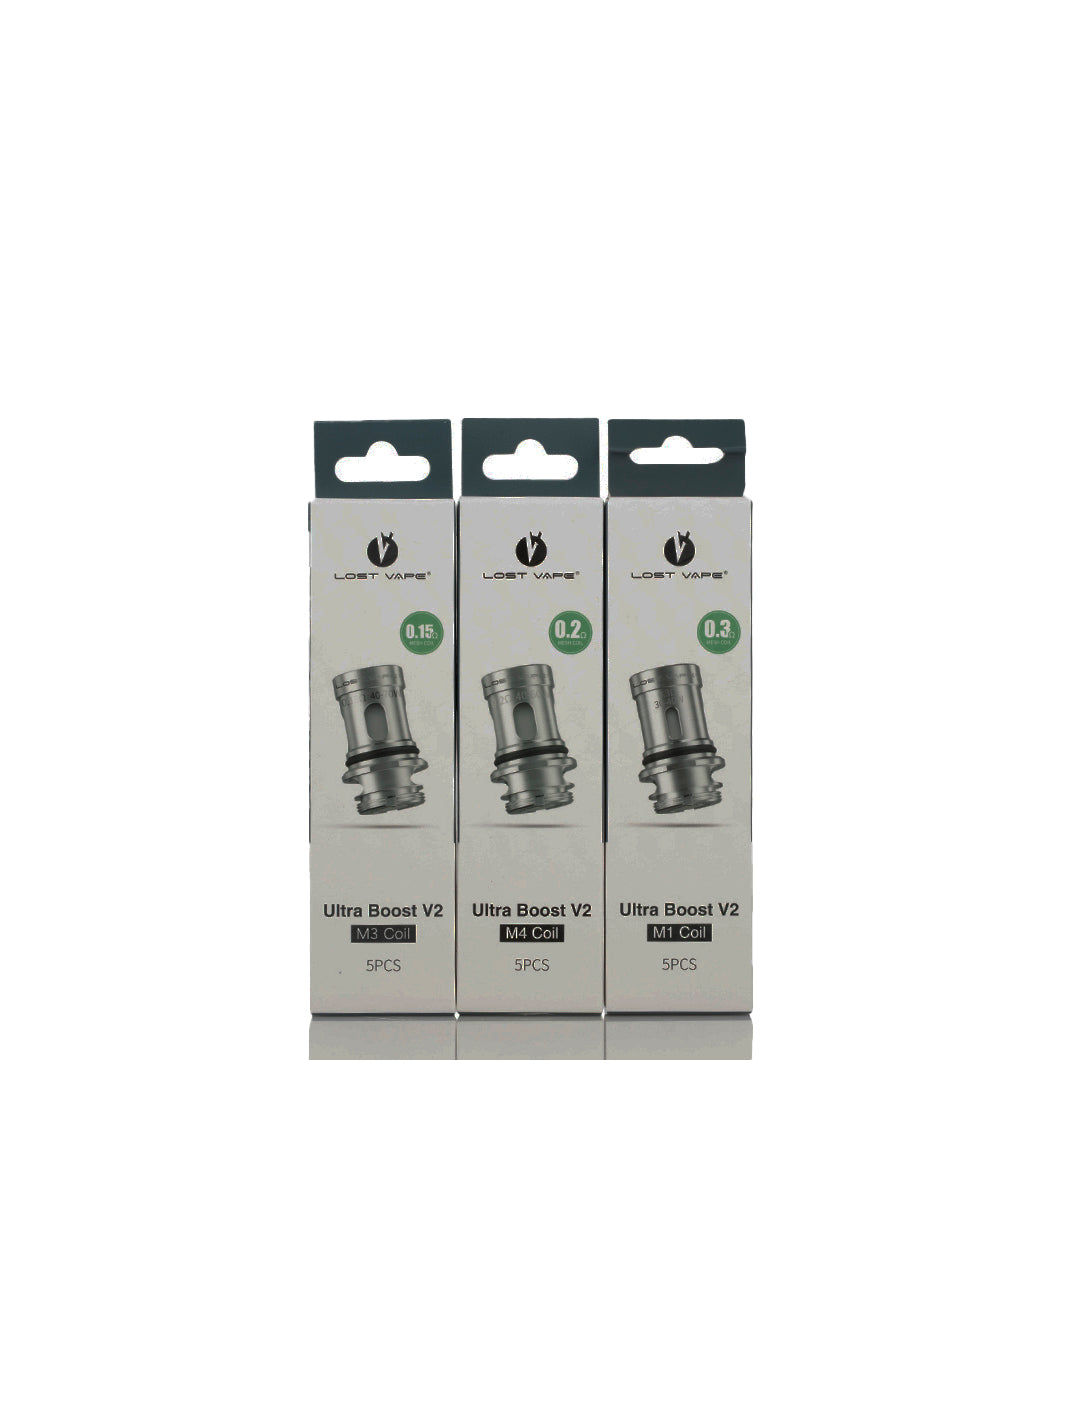 Lost Vape Ultra Boost Pro Coils (5 Pack)